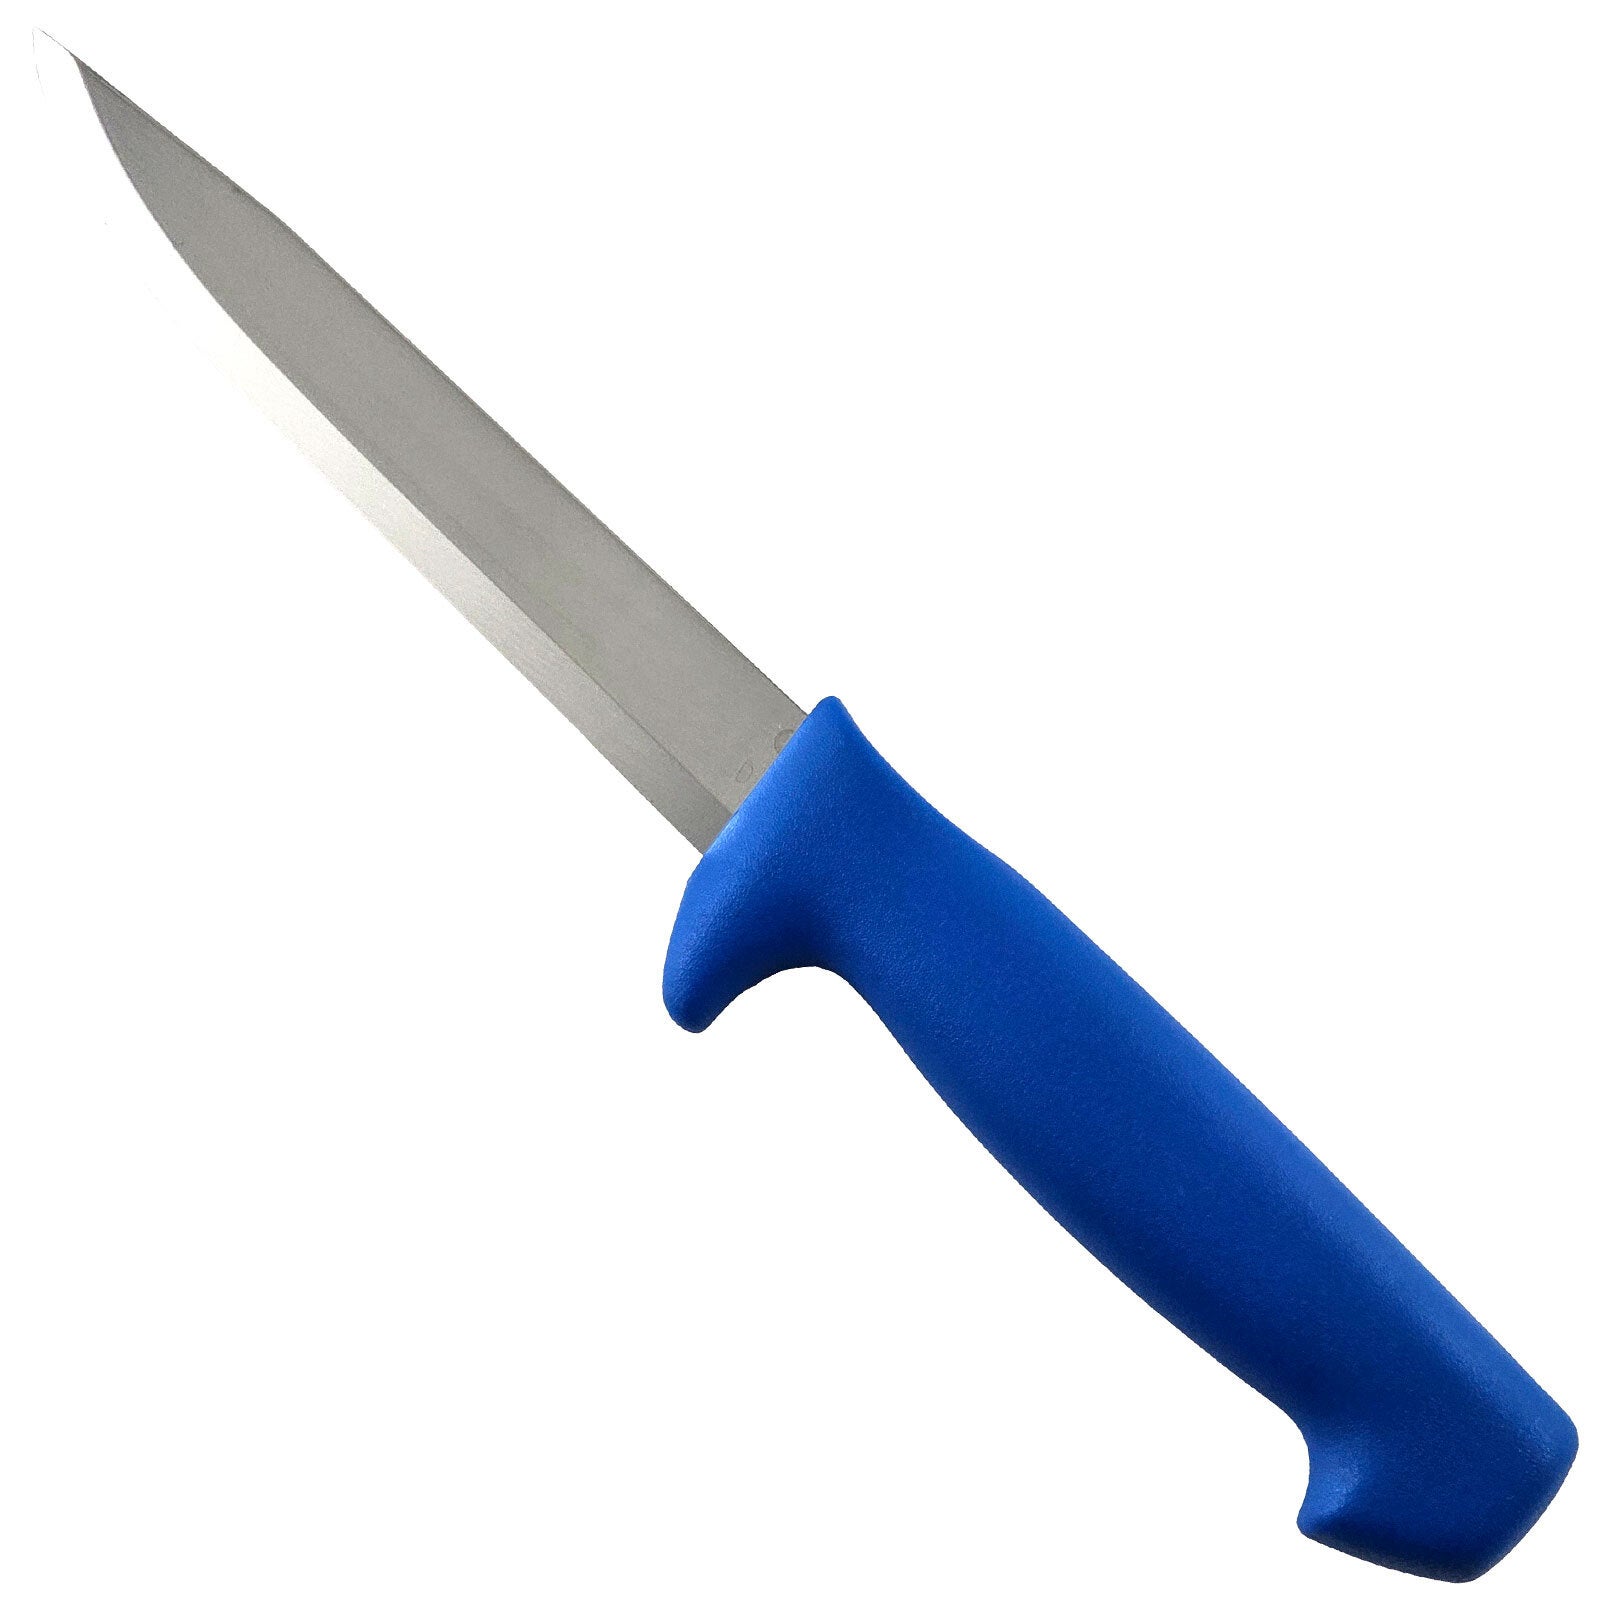 Frosts Mora 150mm Fishing Knife - Blue / Stainless Steel